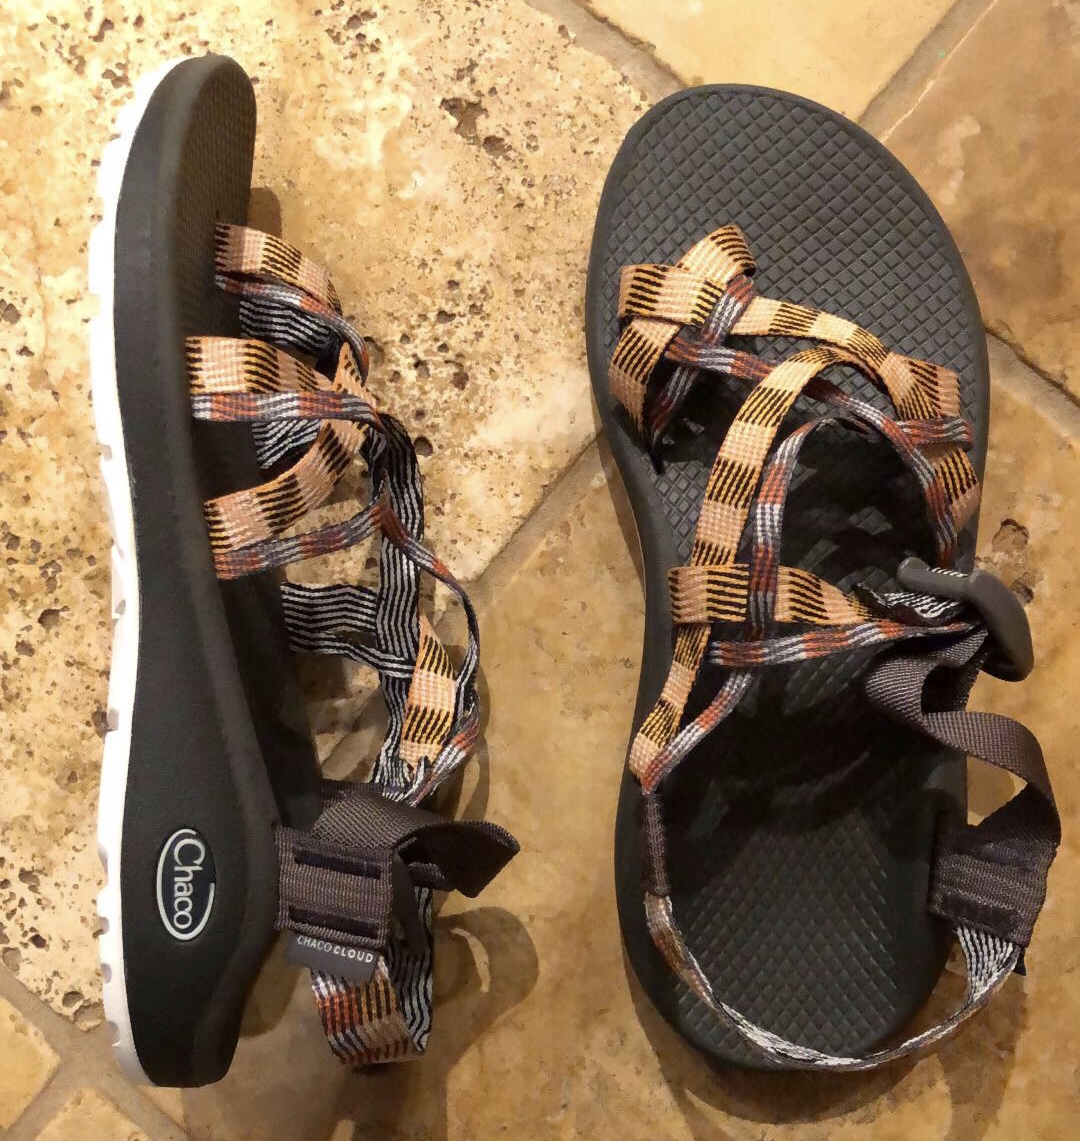 creed pine chacos